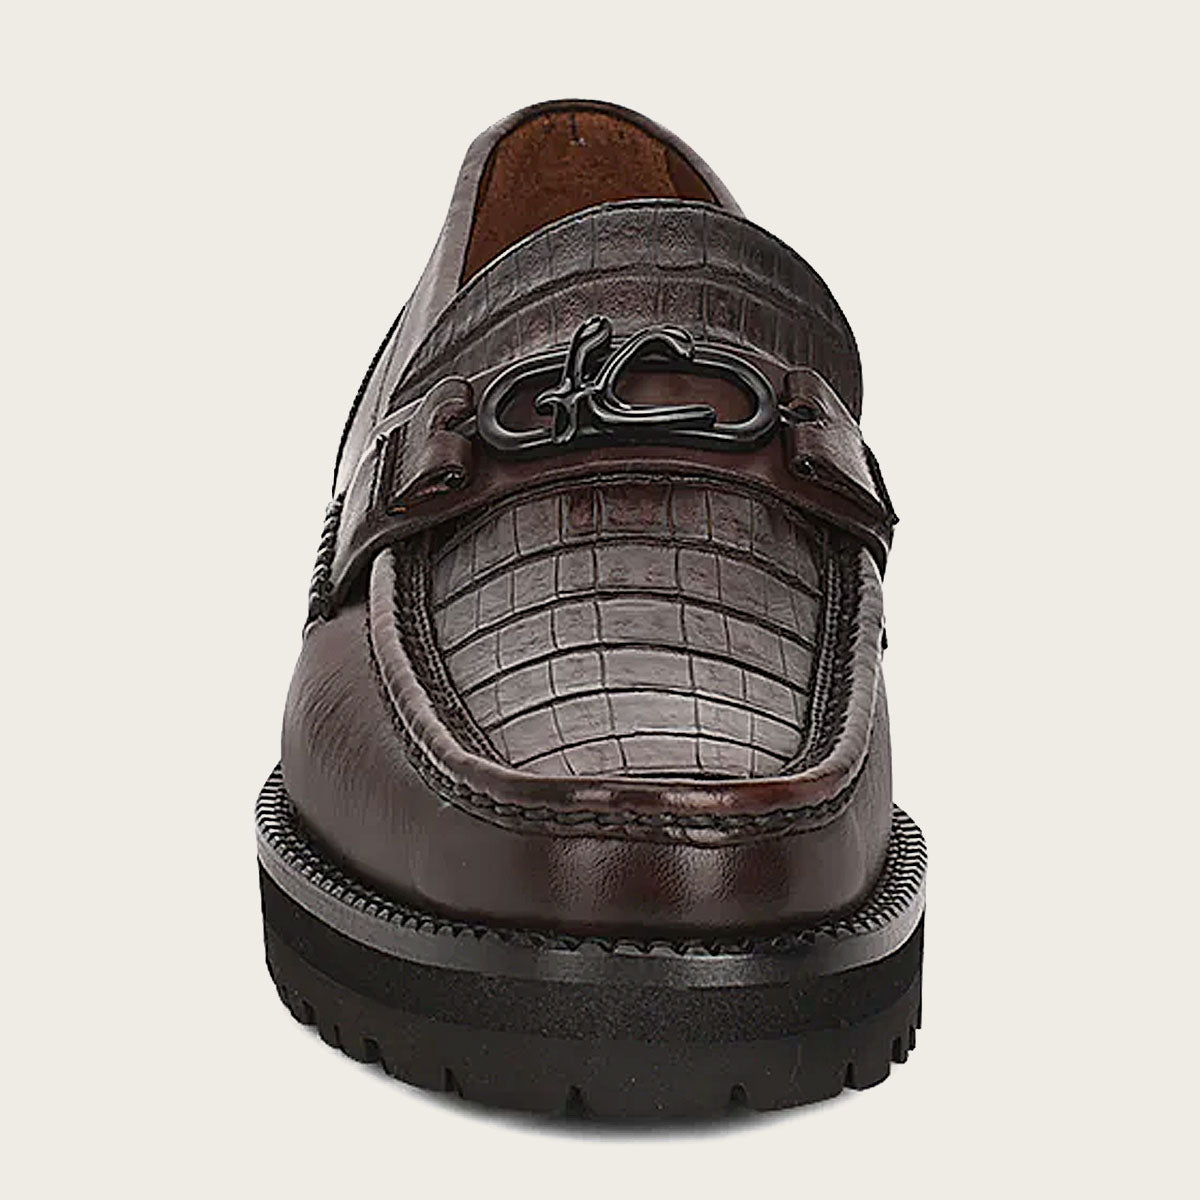 carefully sewed by hand the front of the leather loafer